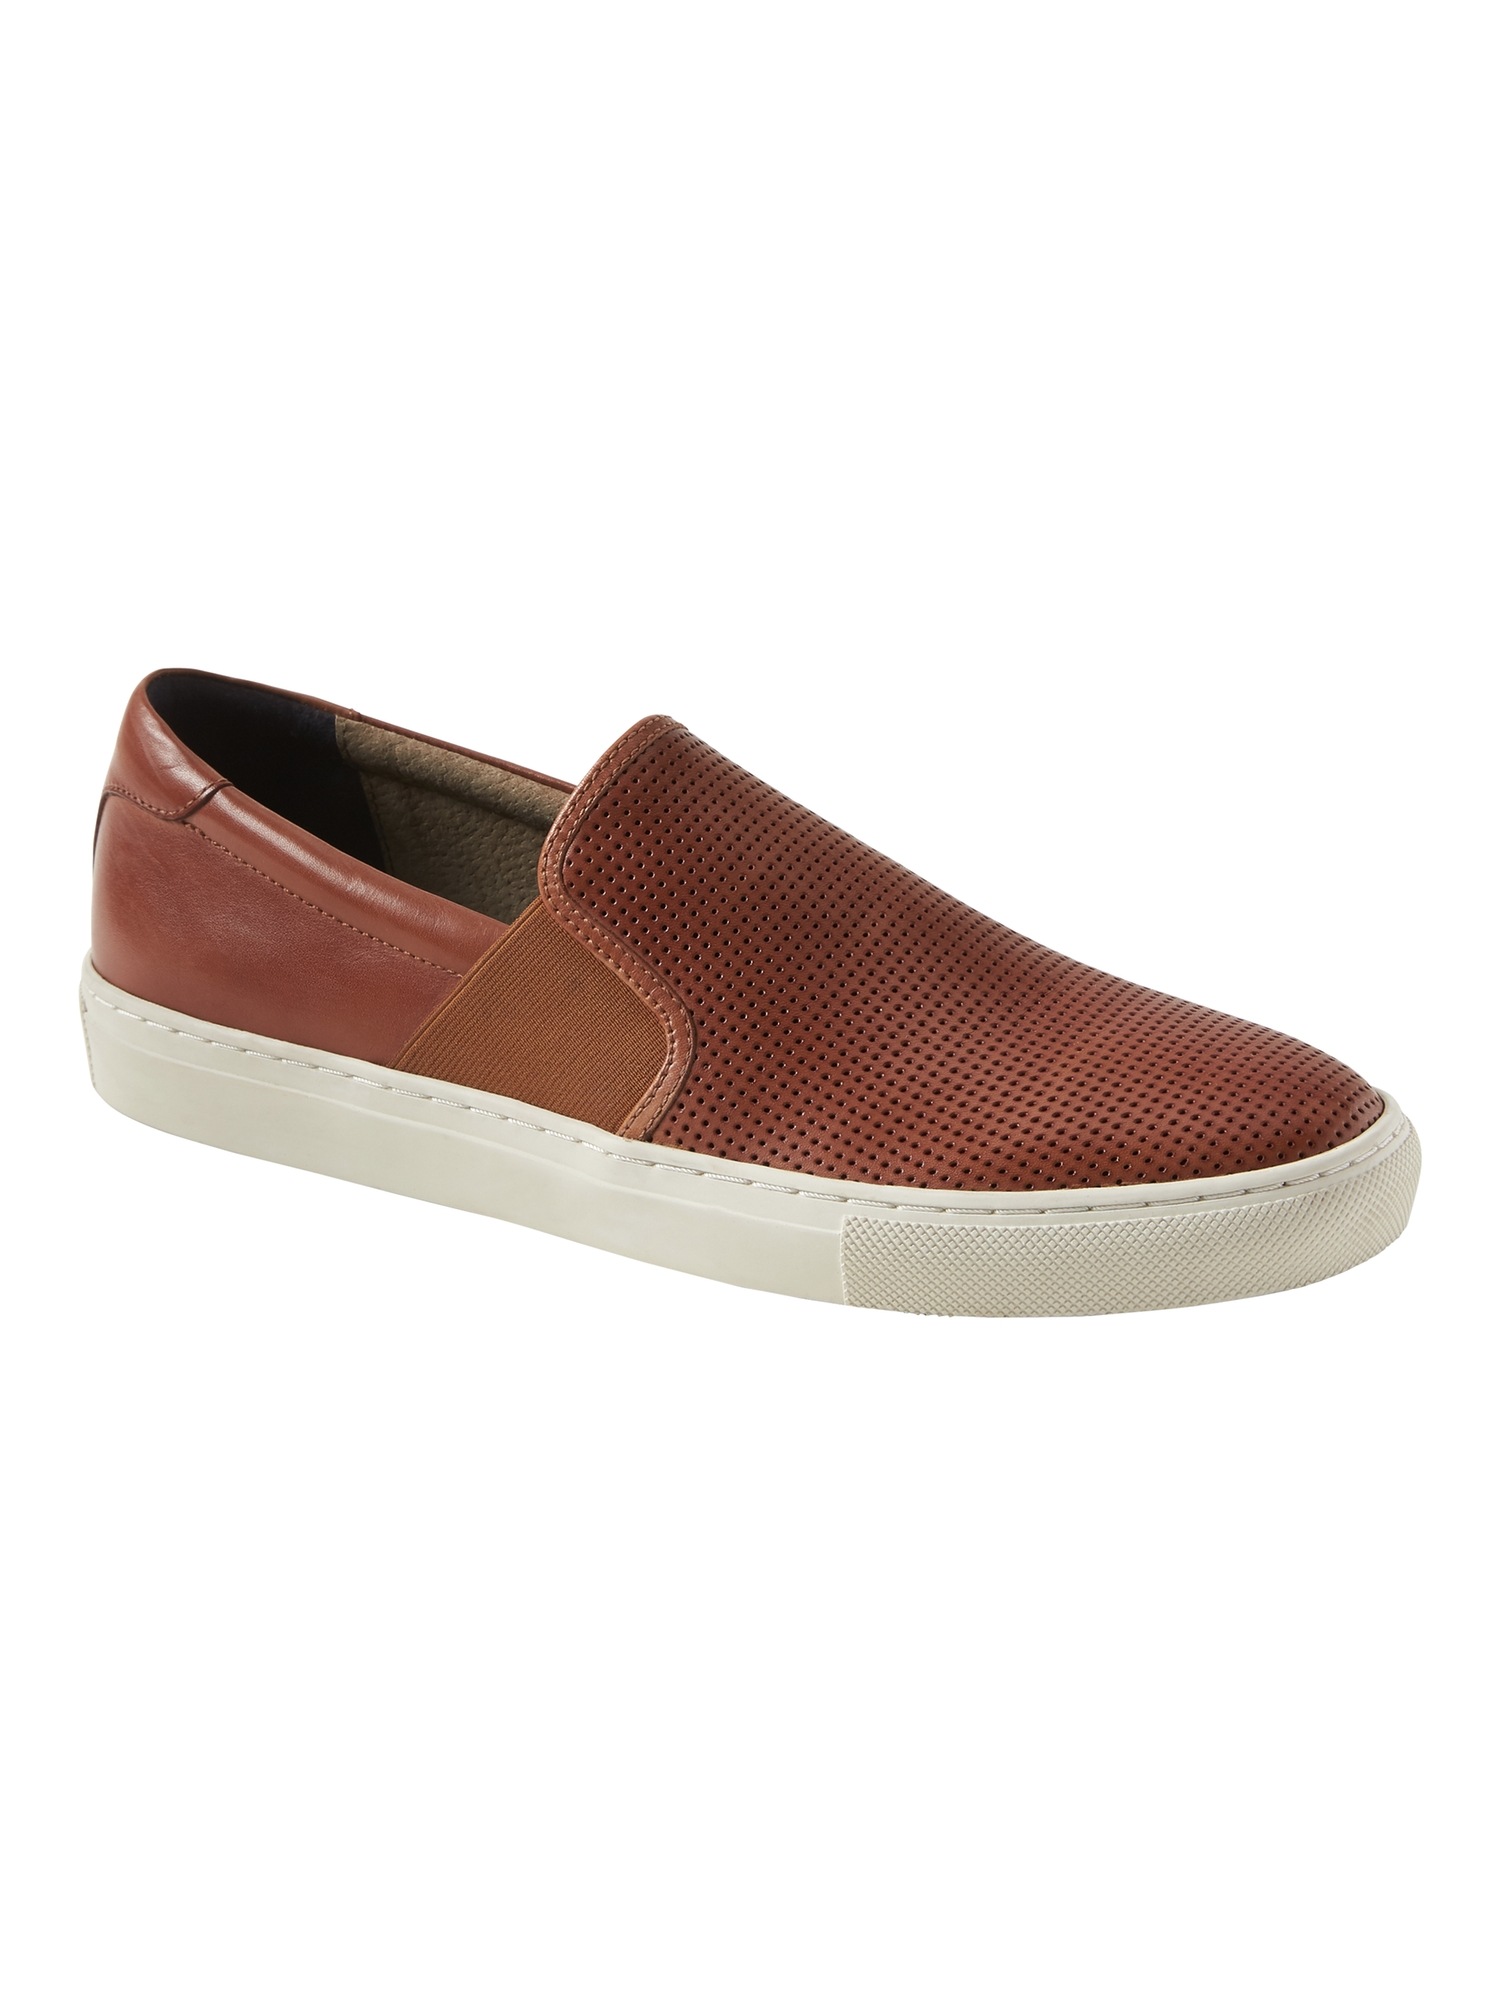 Dylin Perforated Leather Slip-On Sneaker